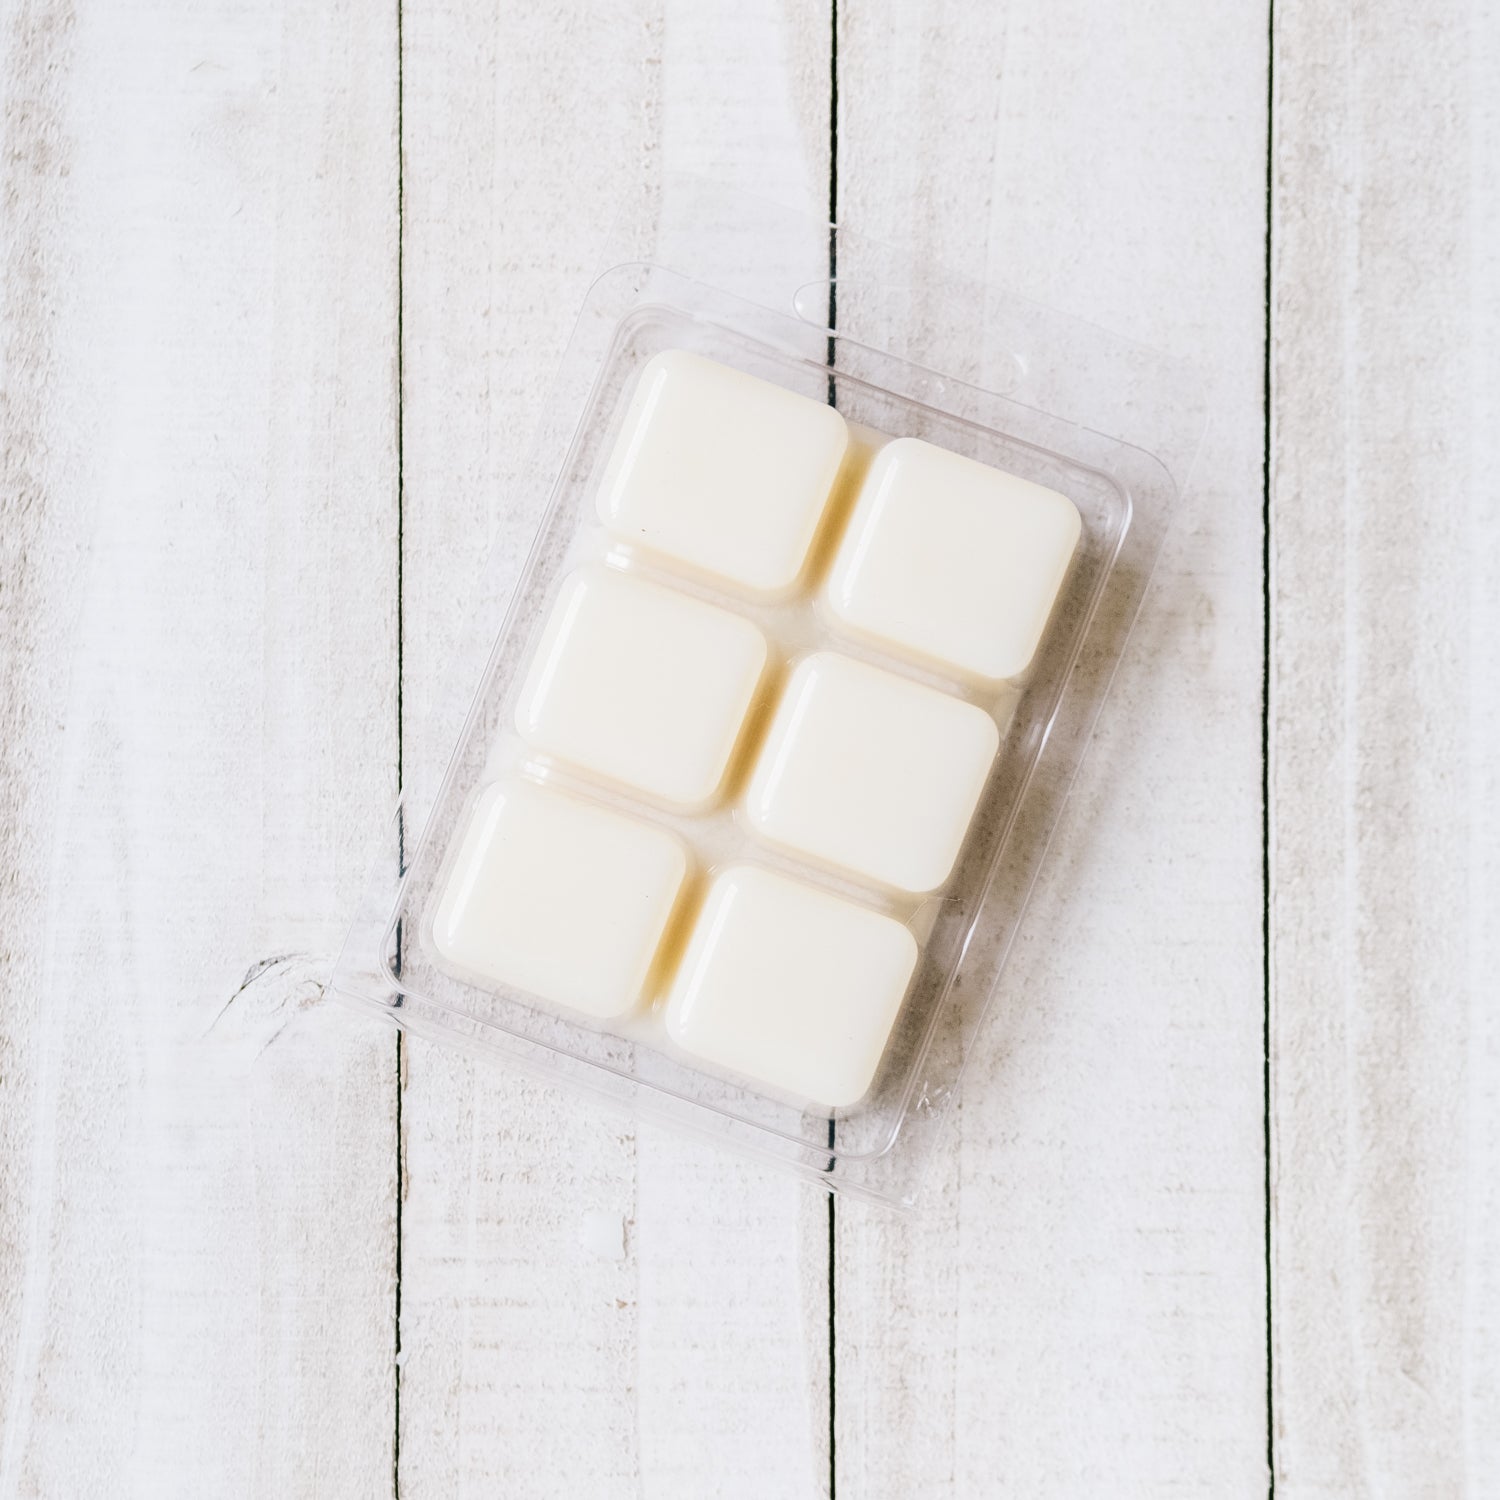 Wholesale Pina Colada Wax Melts - Sample Pouch (2 oz) for your store